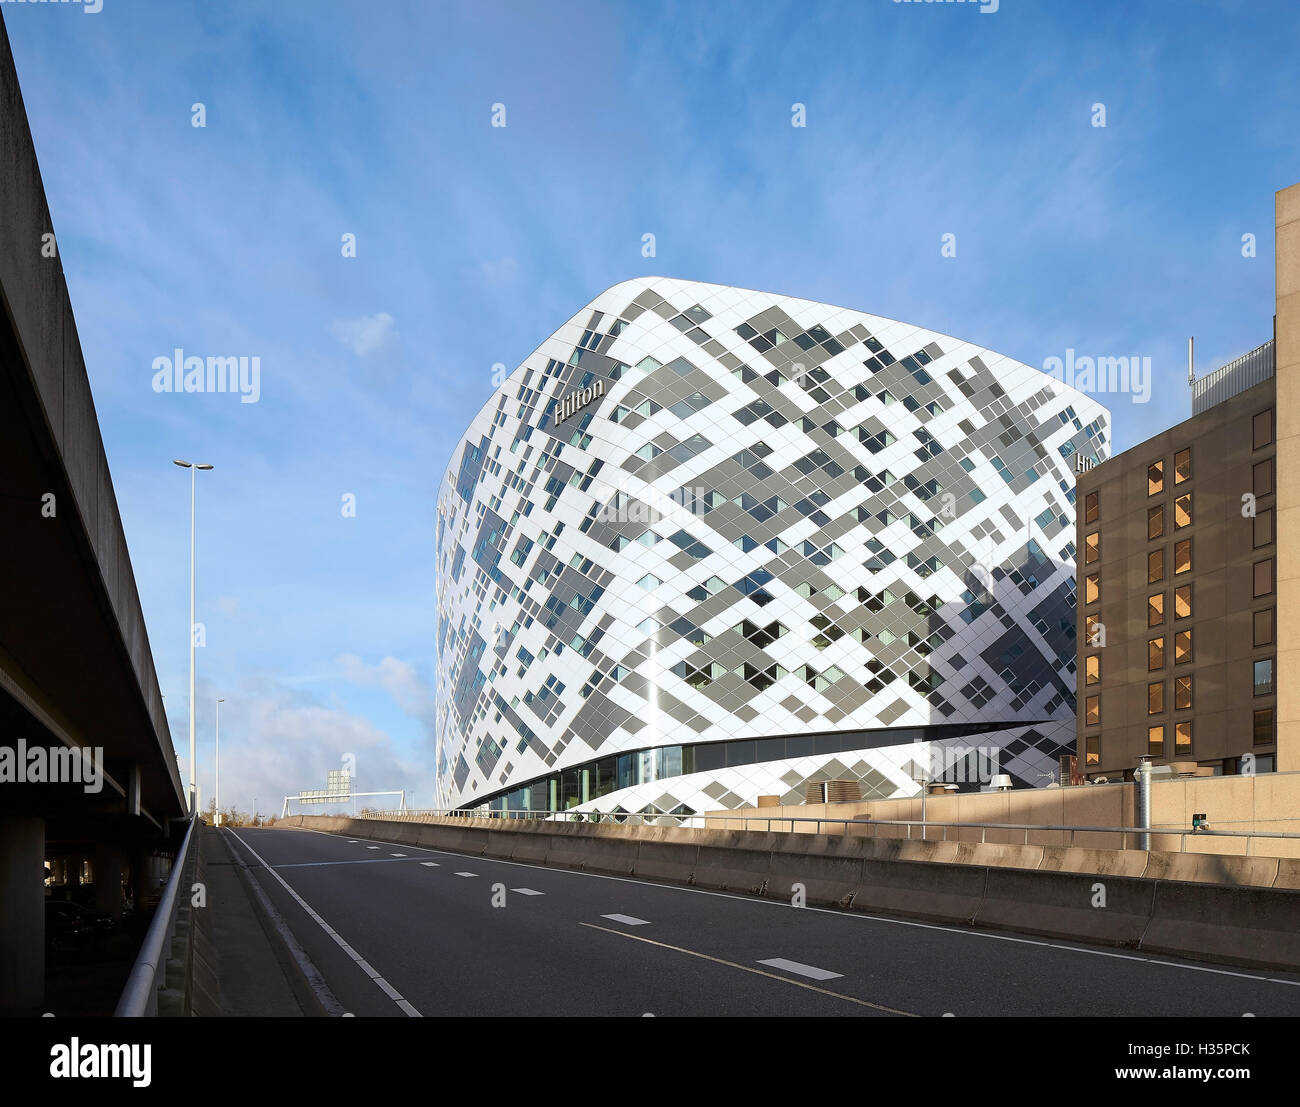 Diagonal pattern of exterior facade as seen from street. Hilton Amsterdam Airport Schiphol, Amsterdam, Netherlands. Architect: Mecanoo Architects, 2015. Stock Photo